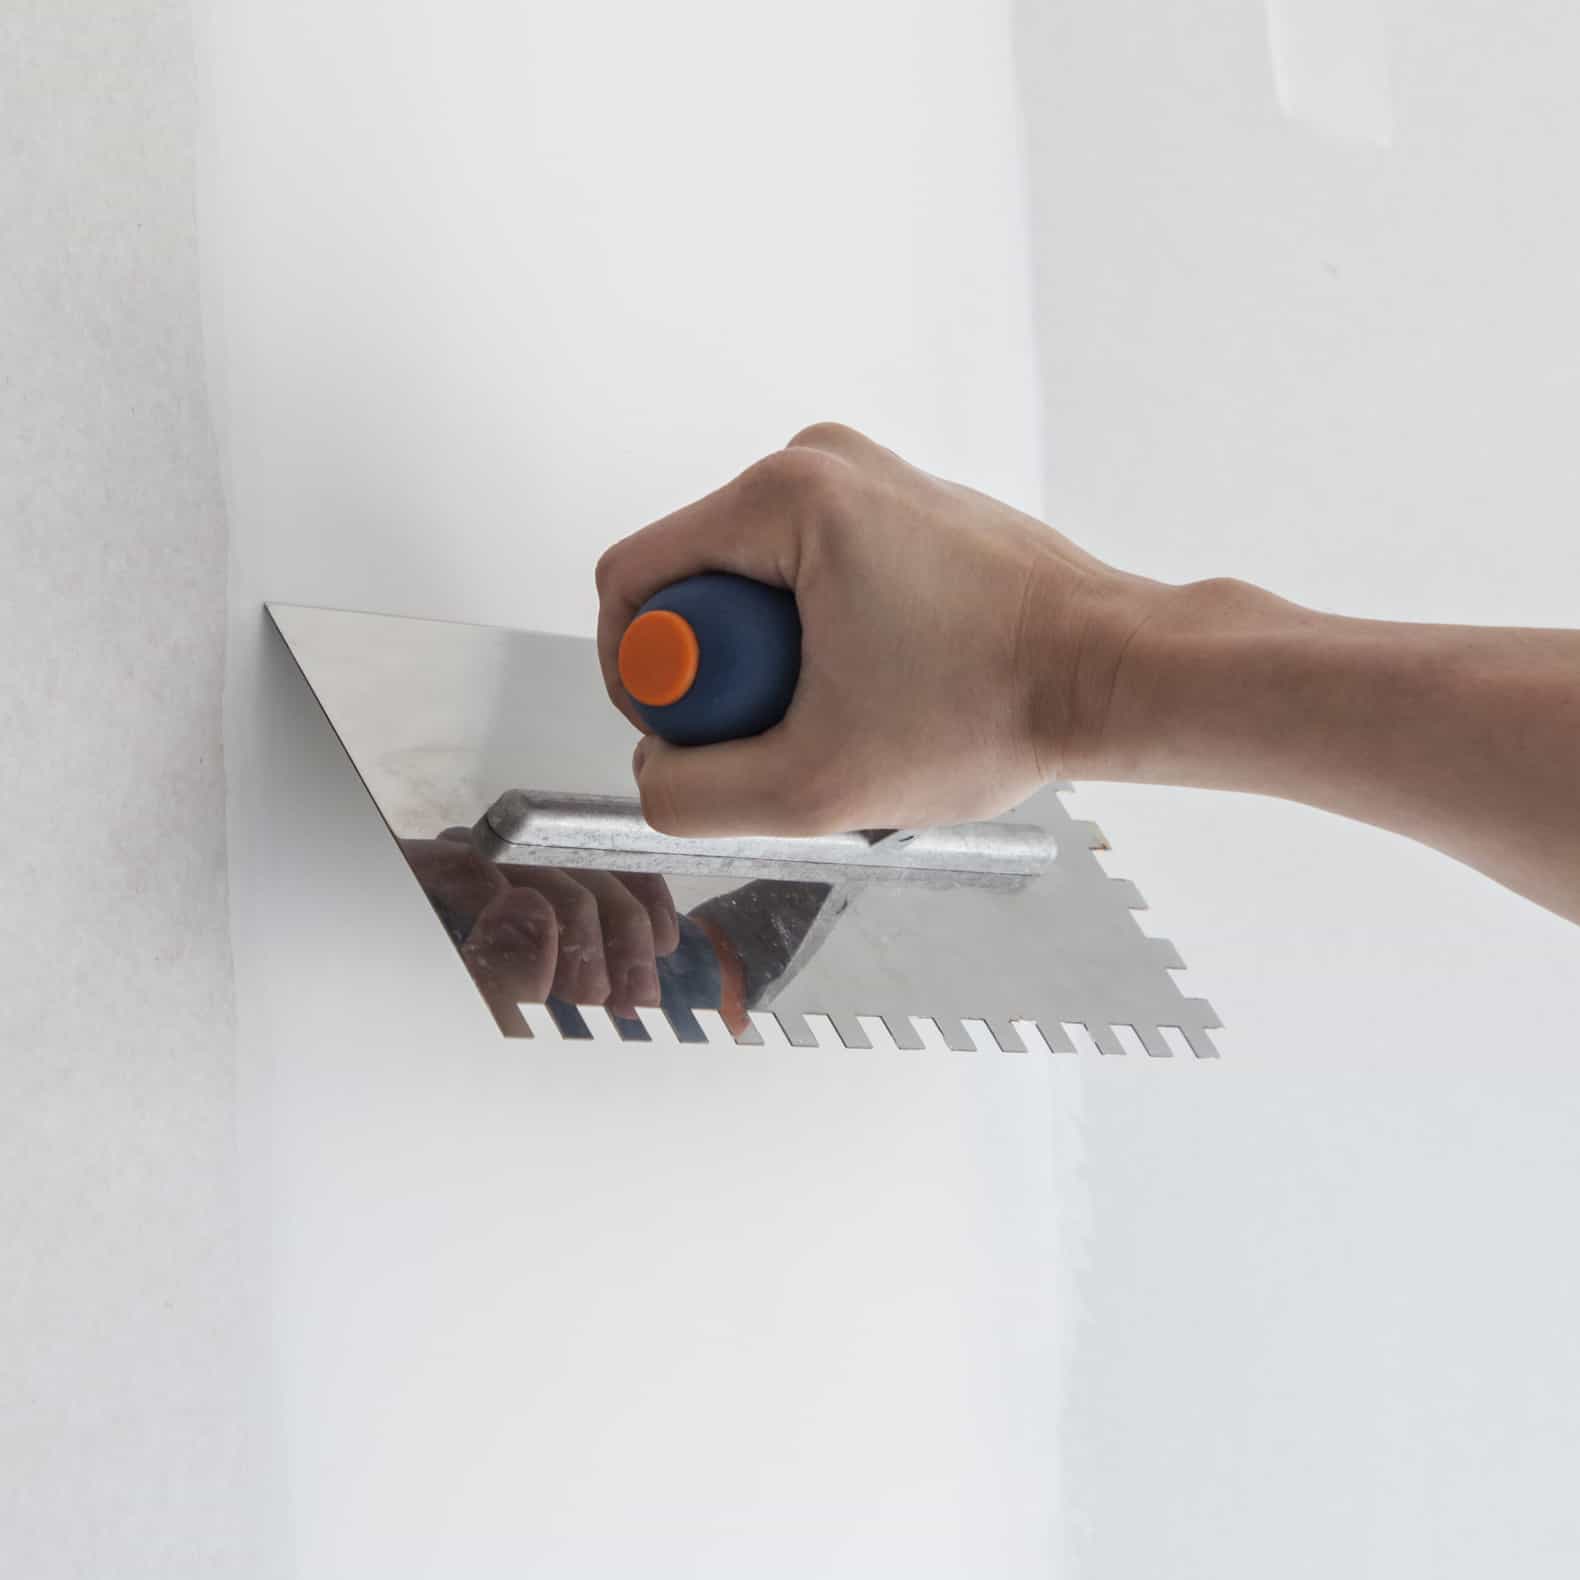 worker spreading paste on the drywall with a hand trowel